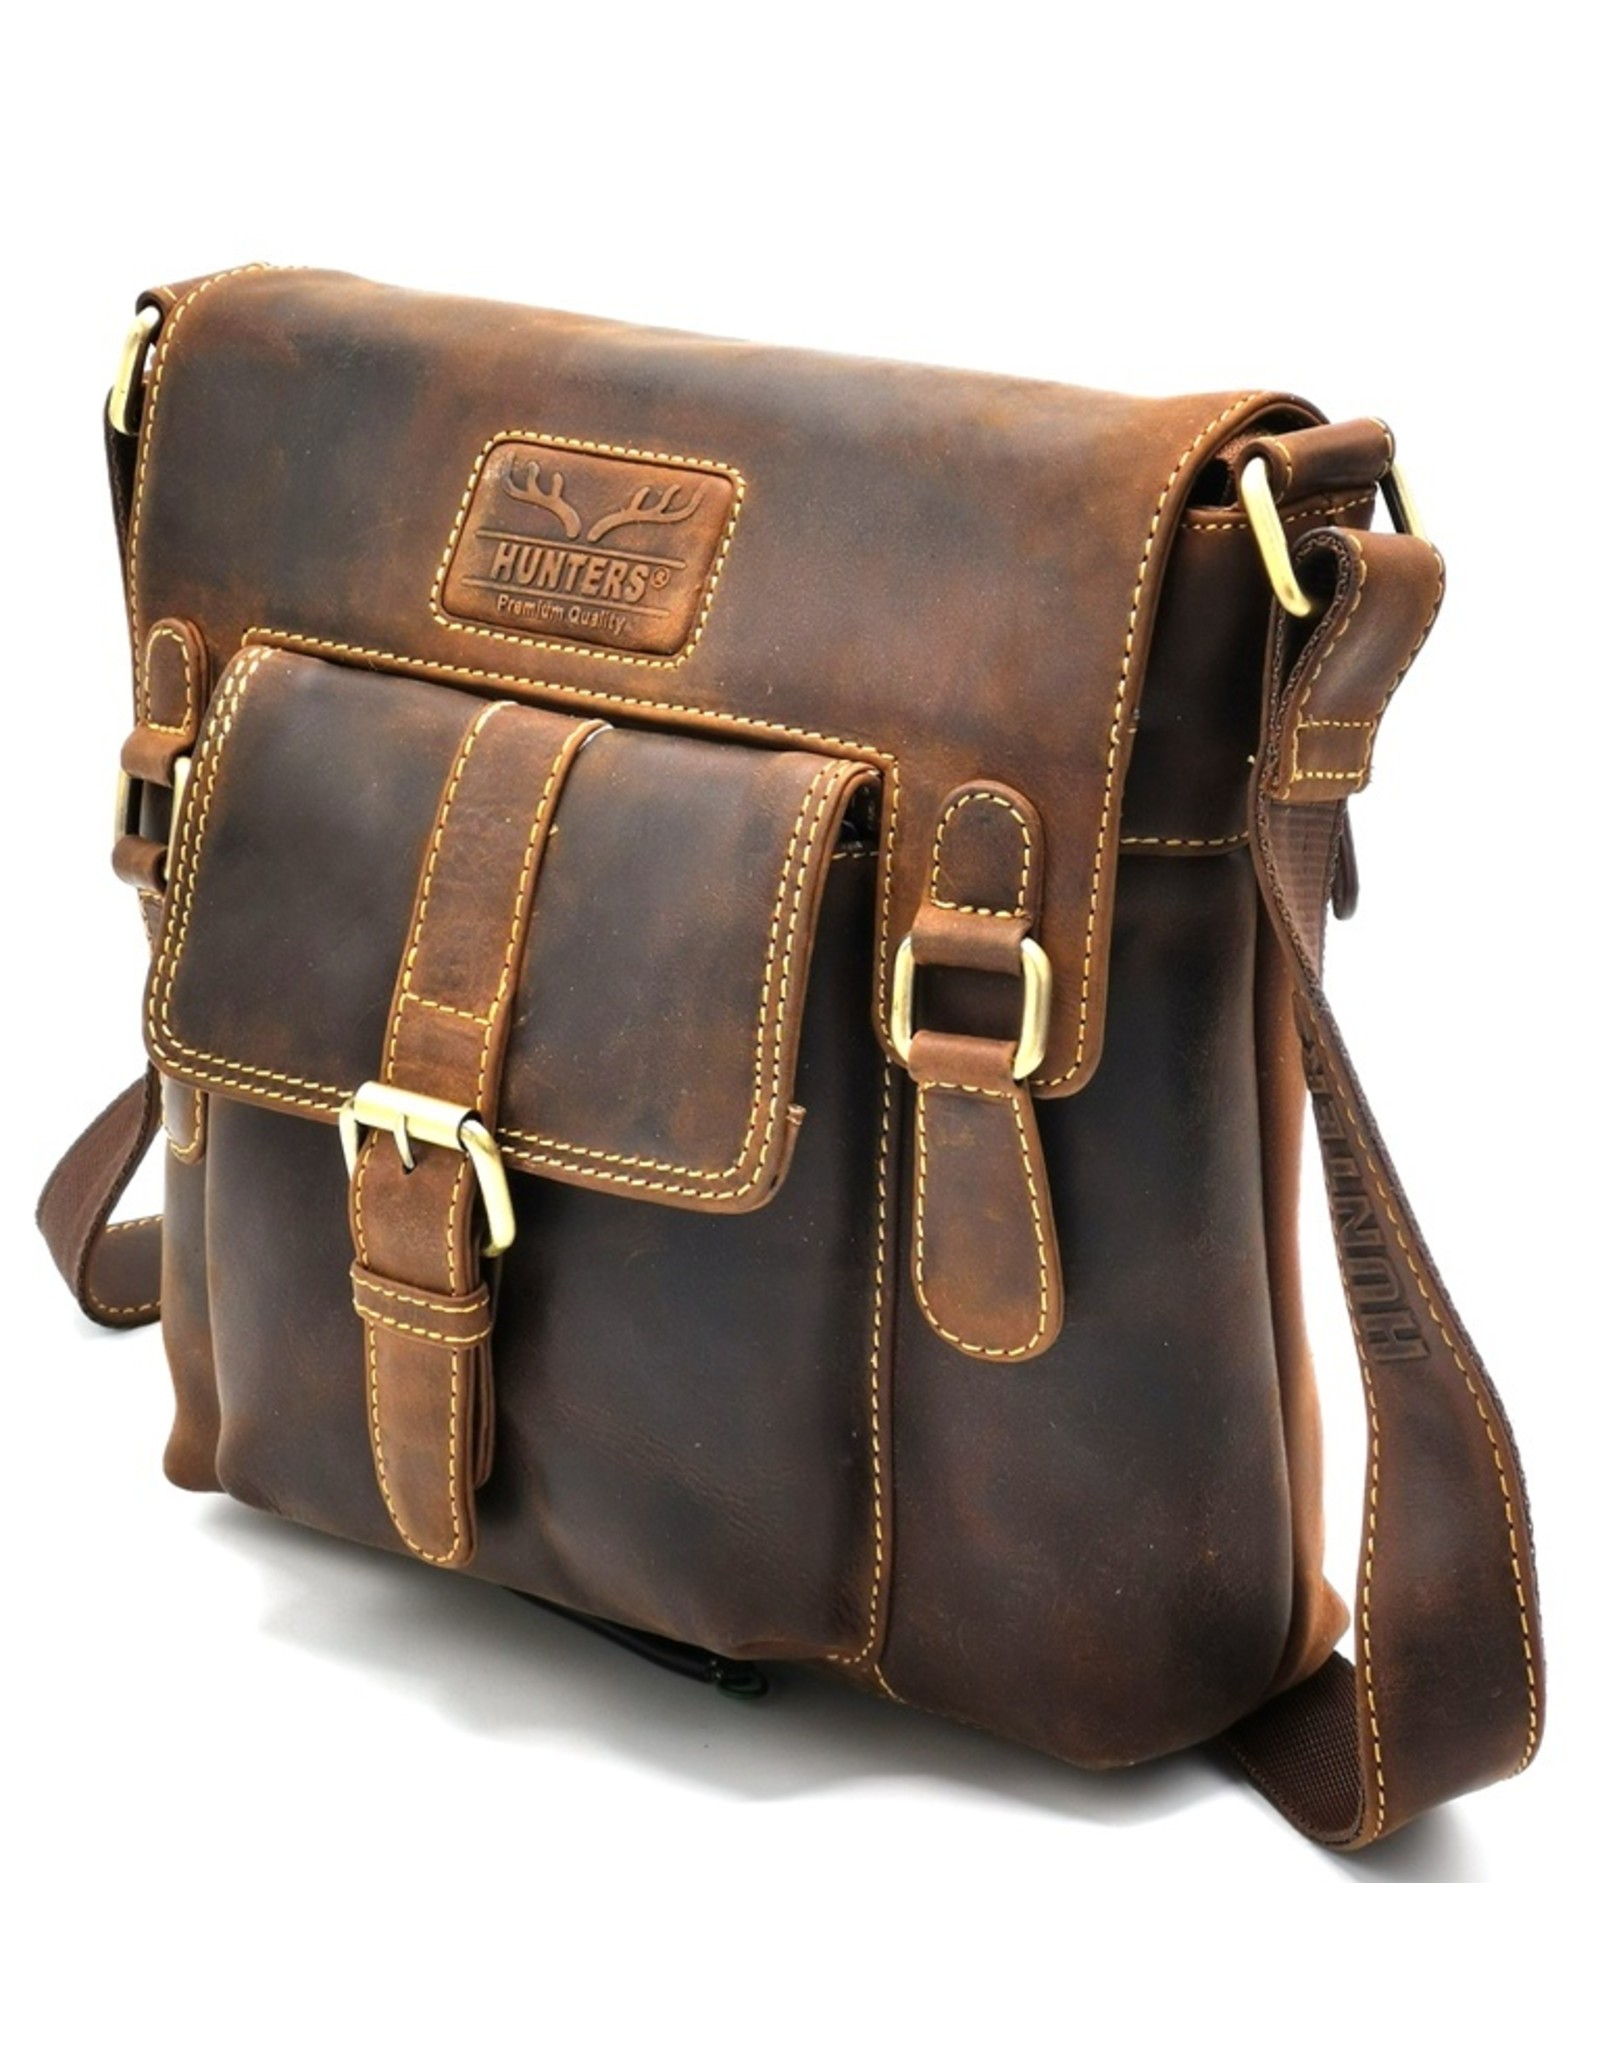 Hunters Leather Shoulder bags  Leather crossbody bags - Hunters crossbody bag with "M" cover brown